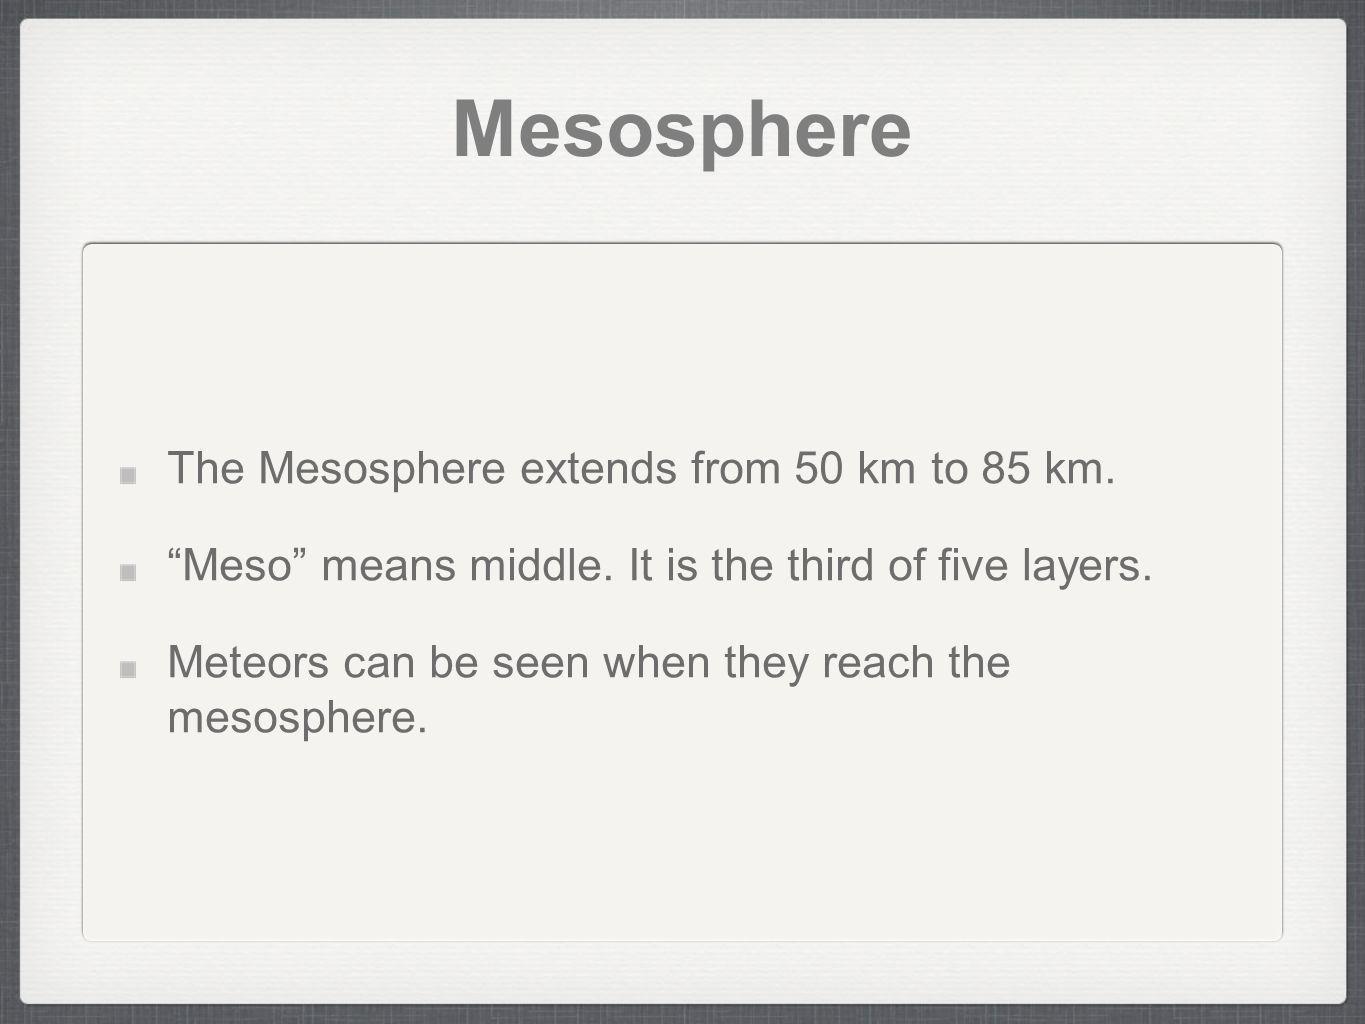 Mesosphere The Mesosphere extends from 50 km to 85 km.